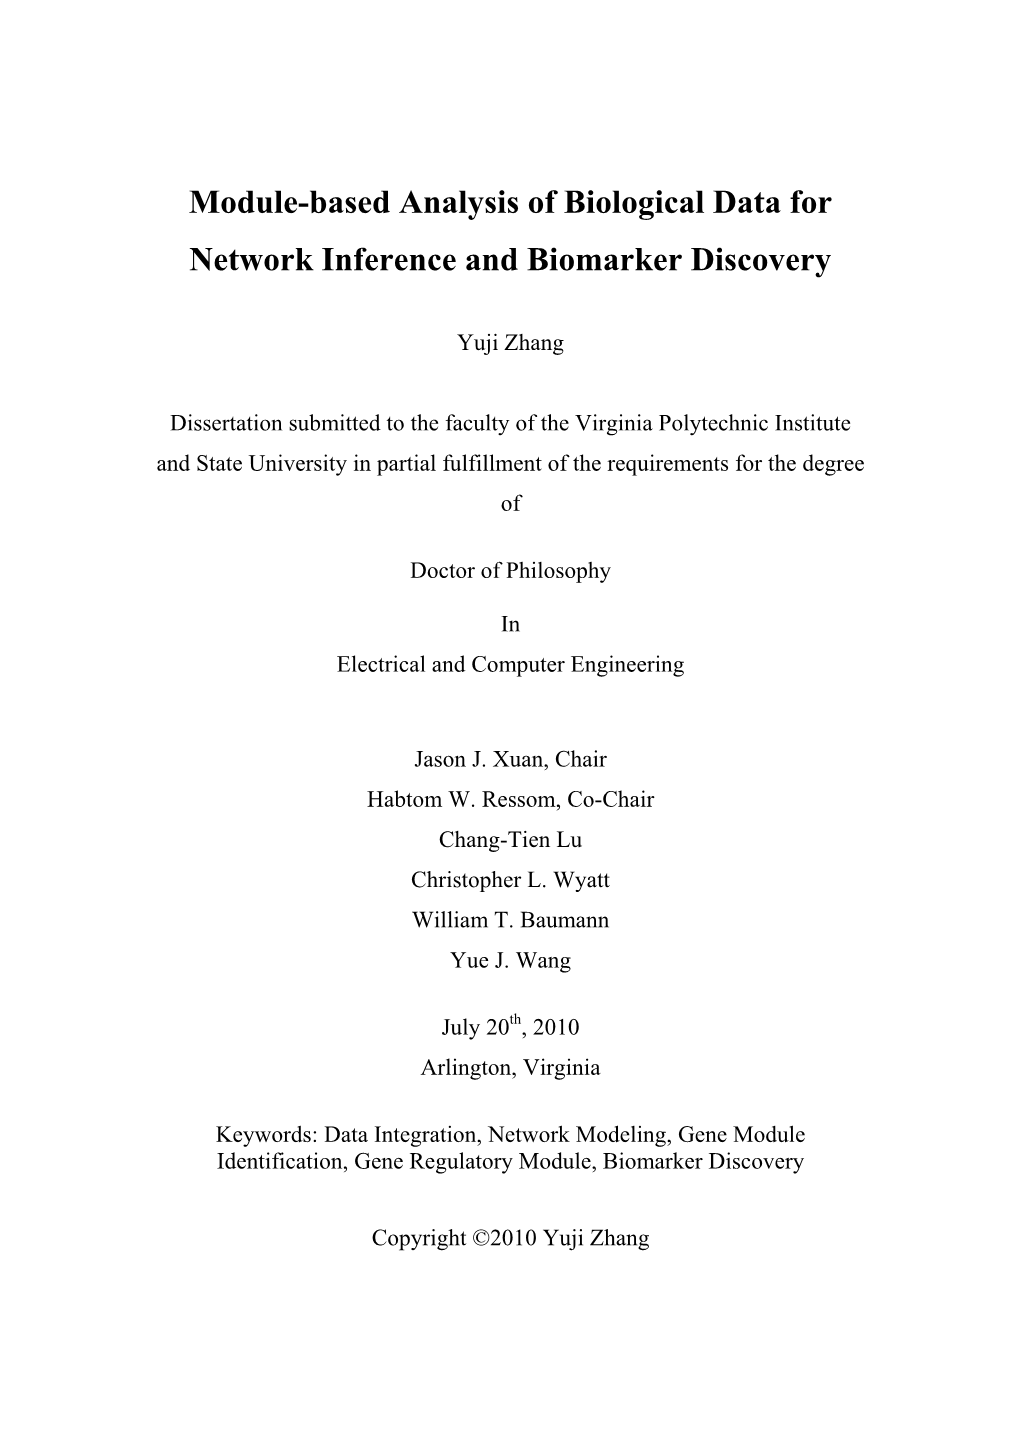 Module-Based Analysis of Biological Data for Network Inference and Biomarker Discovery